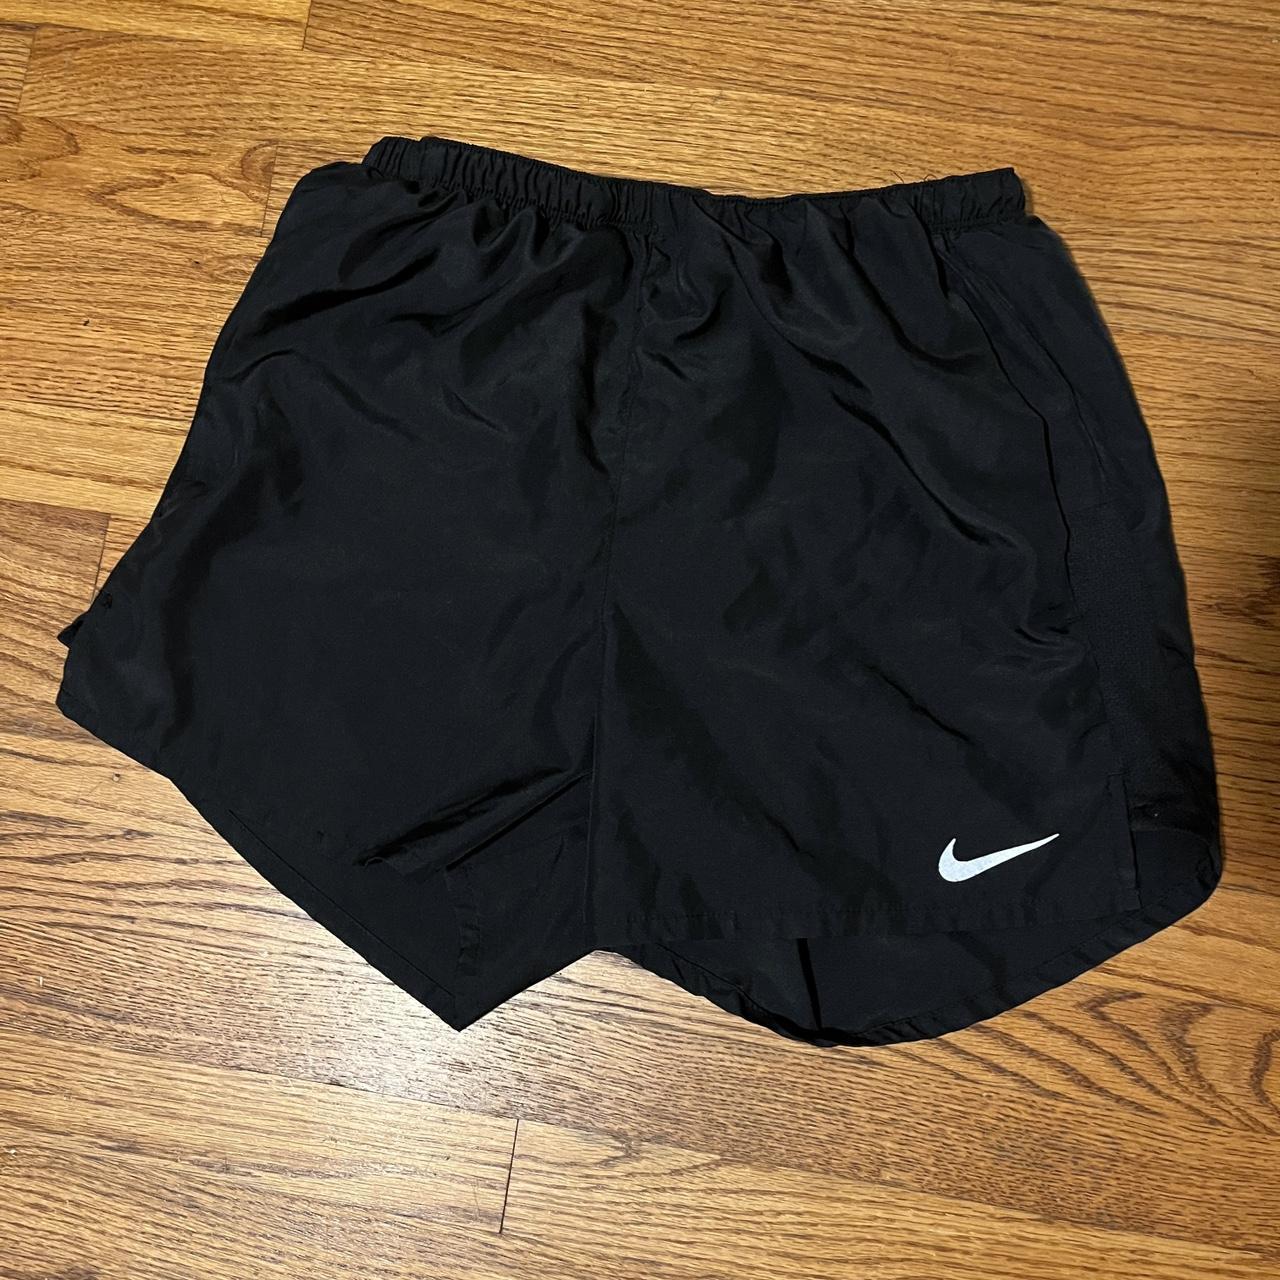 Nike 5” inseam running shorts with mesh liner on... - Depop